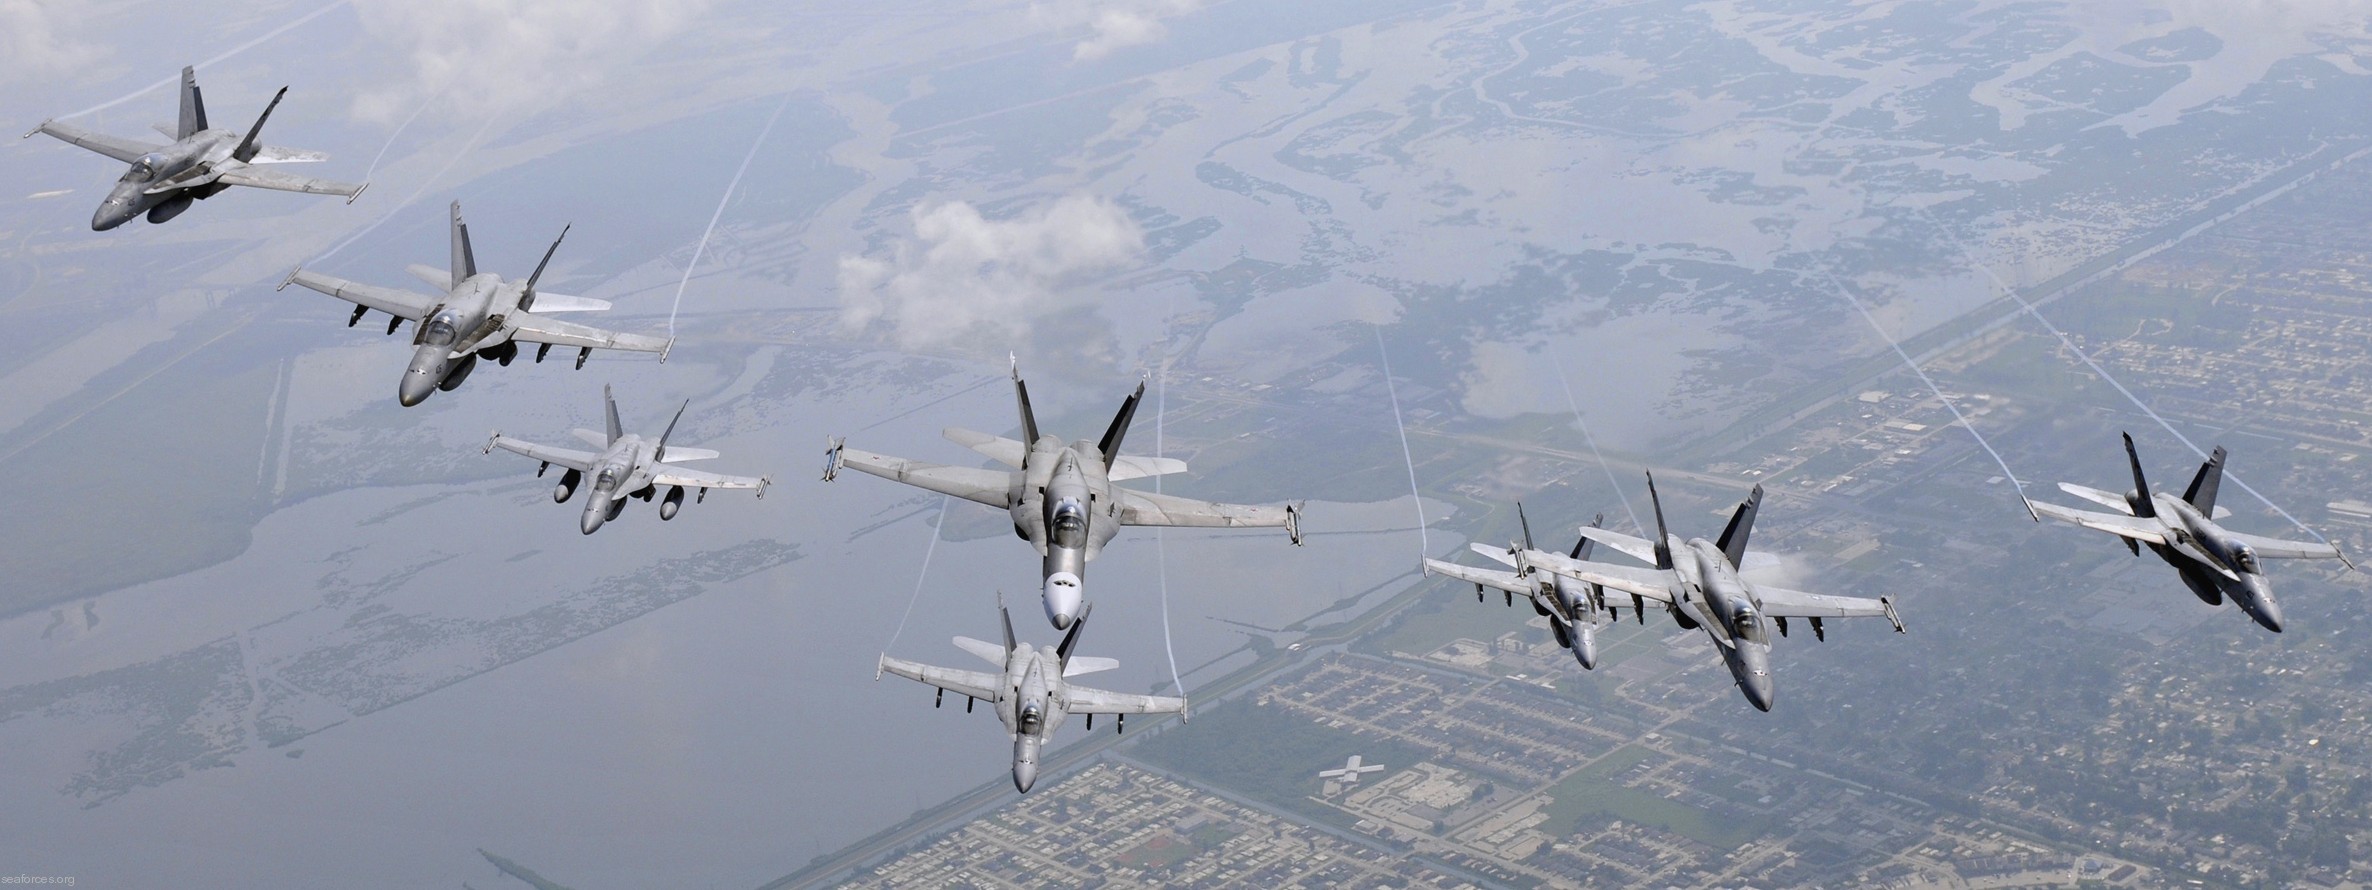 vfa-204 river rattlers f/a-18a+ hornet strike fighter squadron us navy reserve 06 nas jrb new orleans louisiana